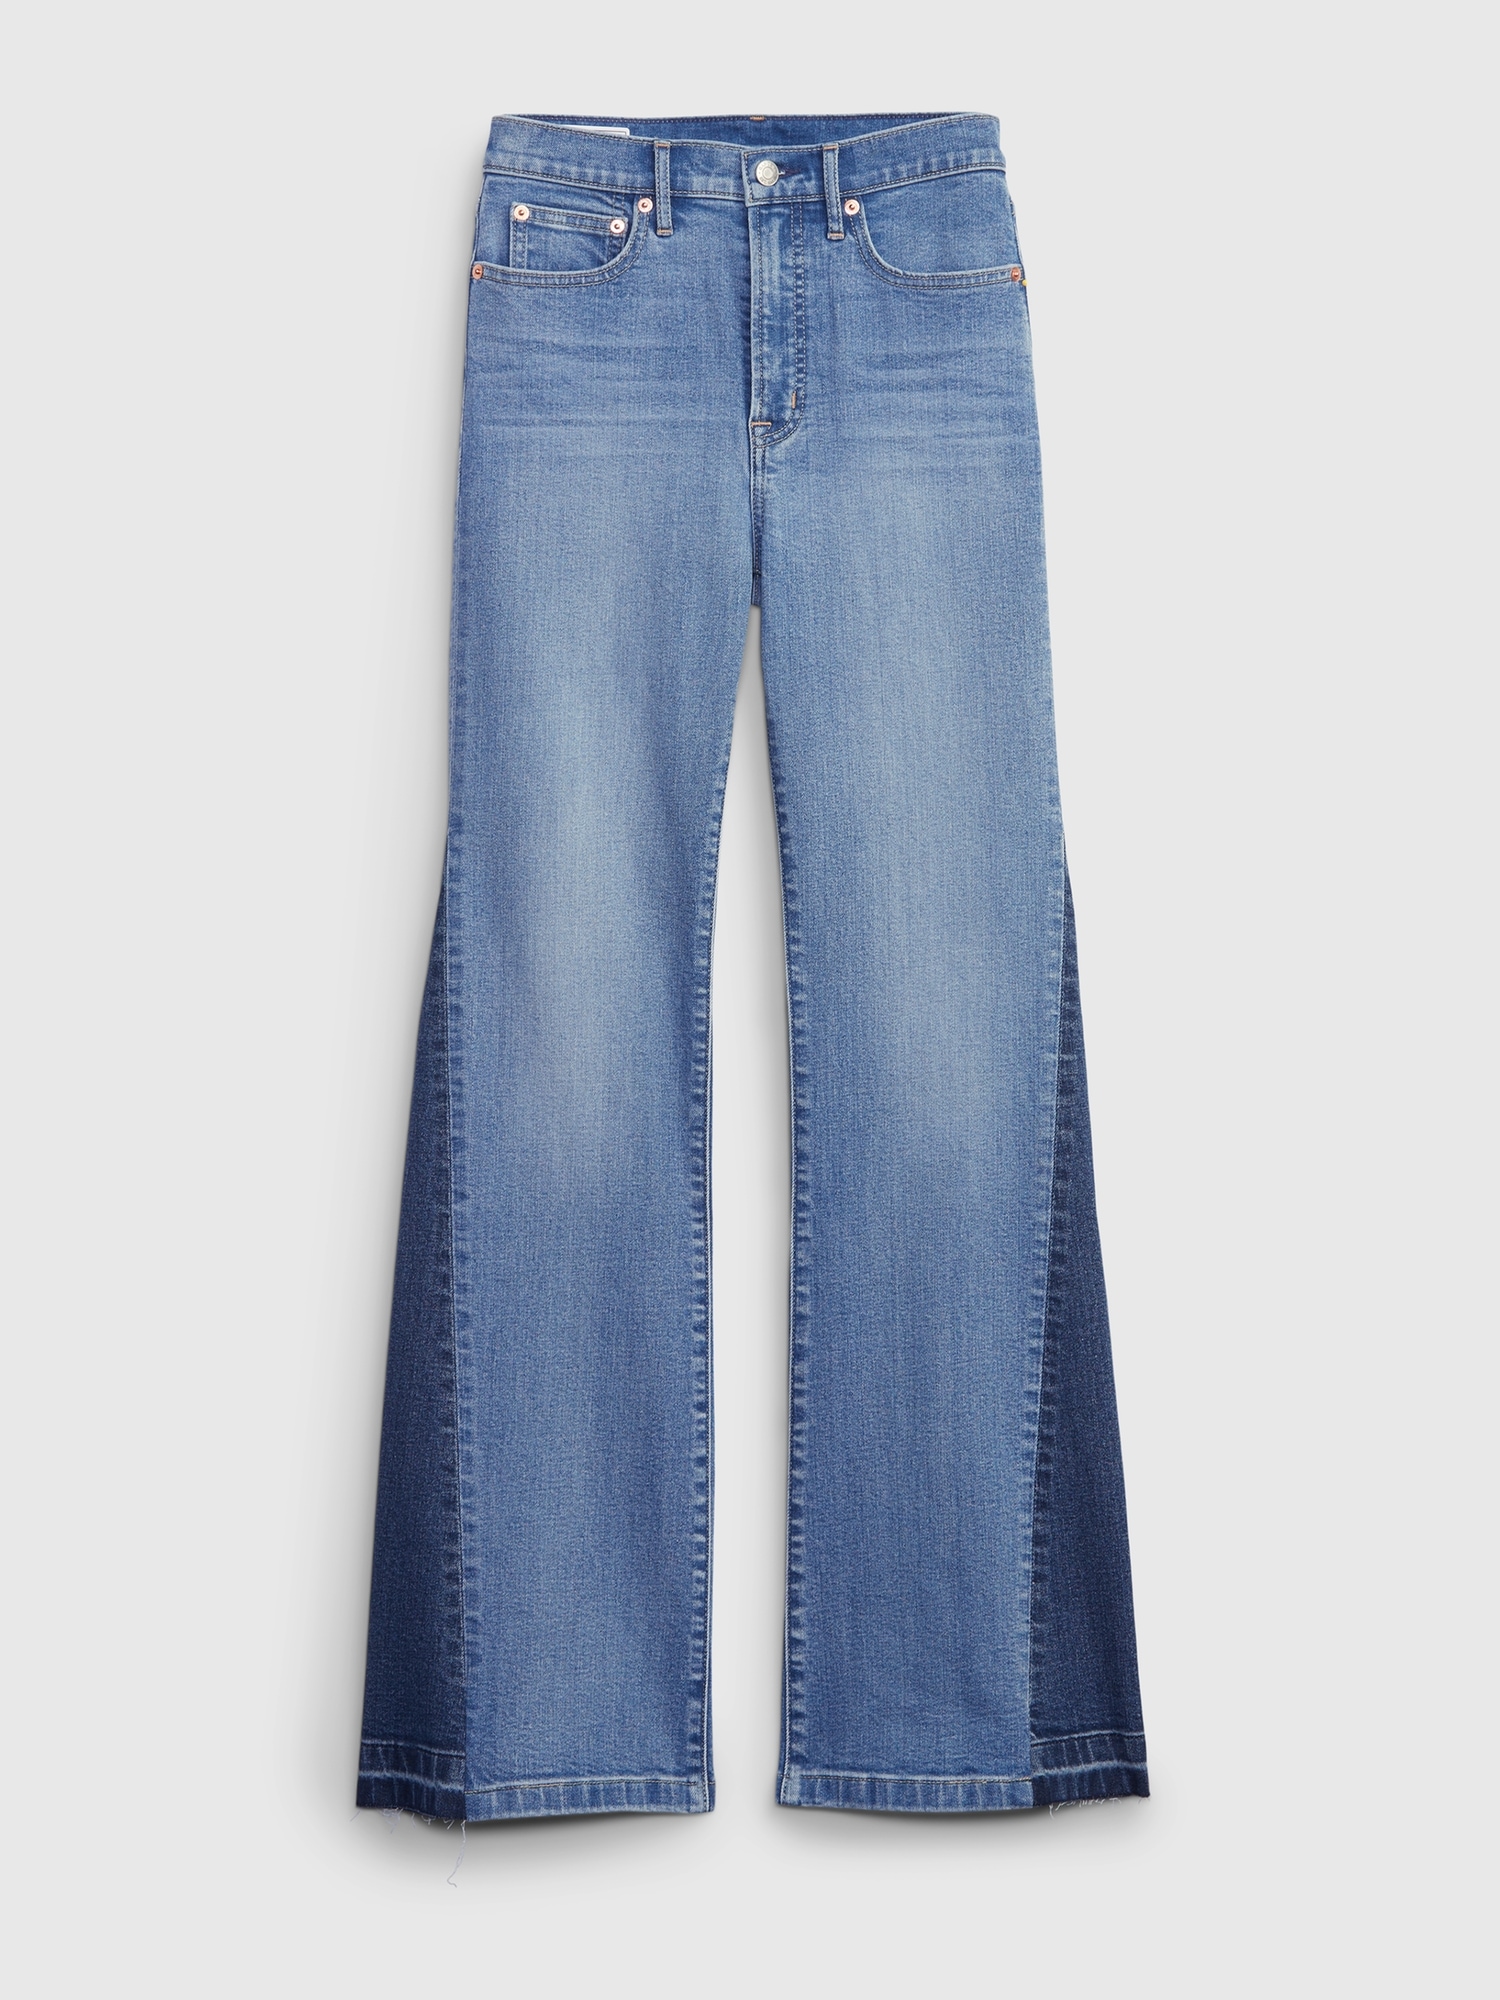 High Rise \'70s Flare Jeans | Gap